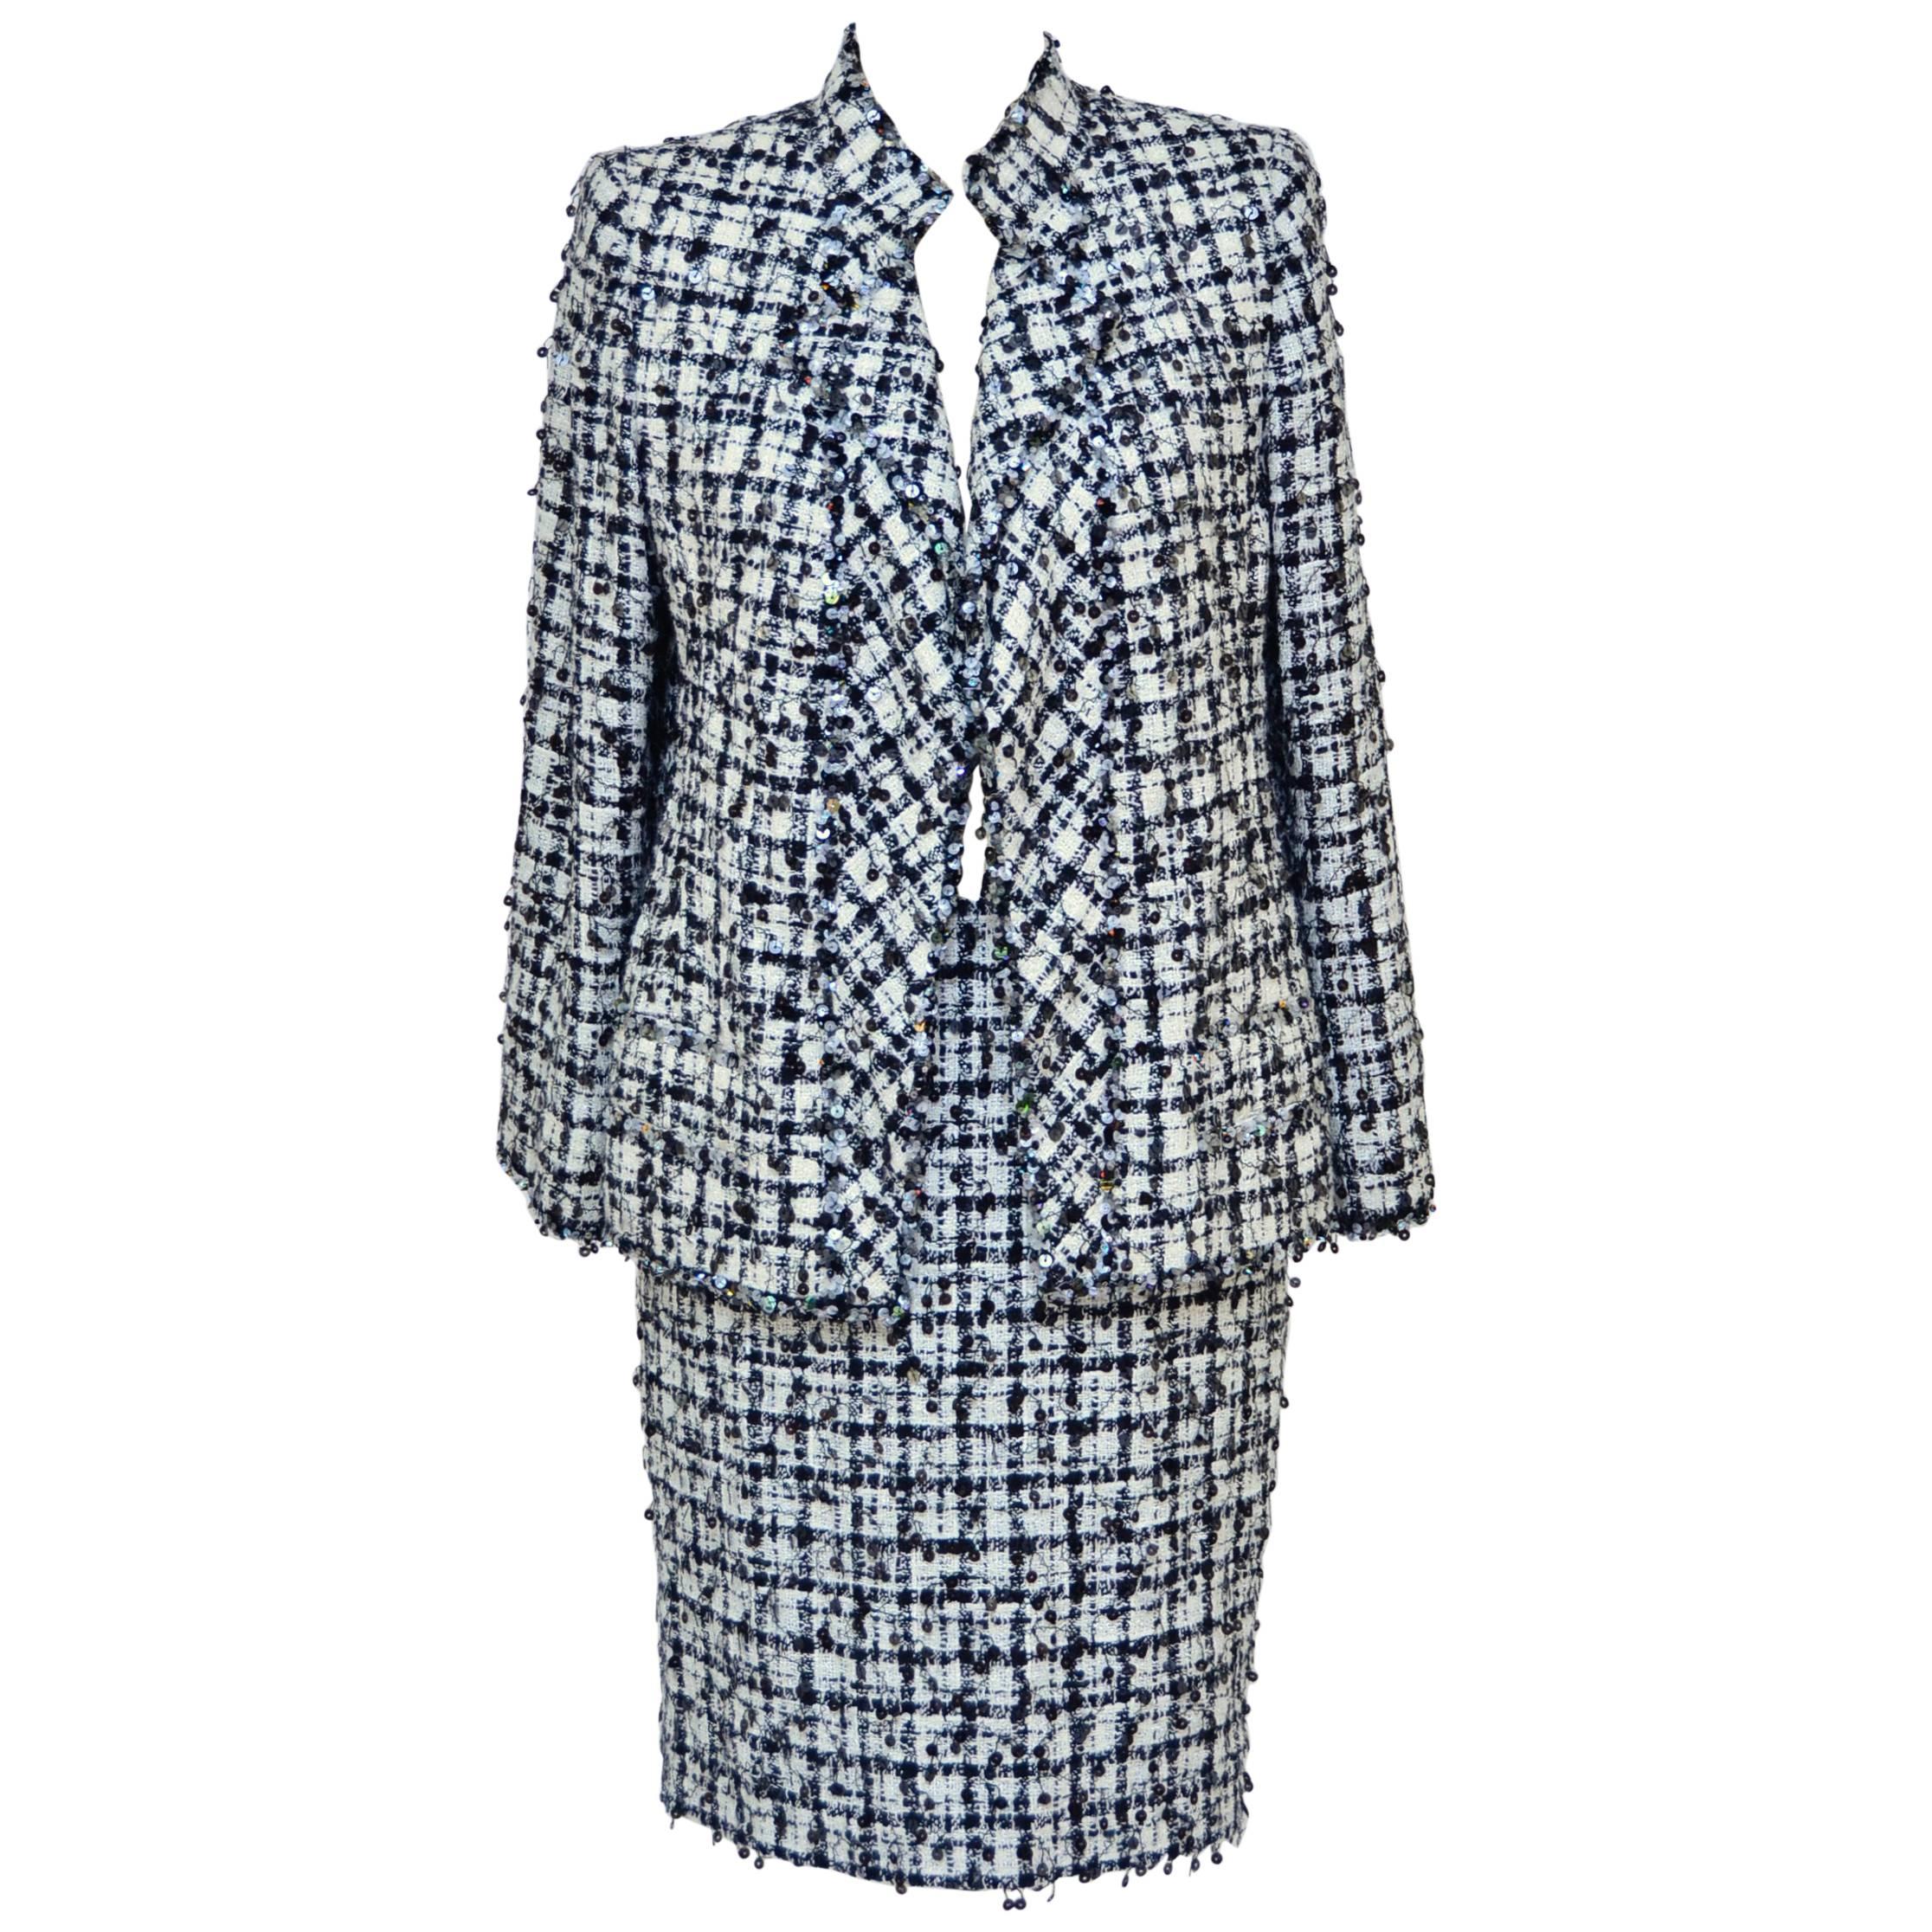 CHANEL Haute Couture Beaded Sequence Embellished  Tweed  Suit   Mint